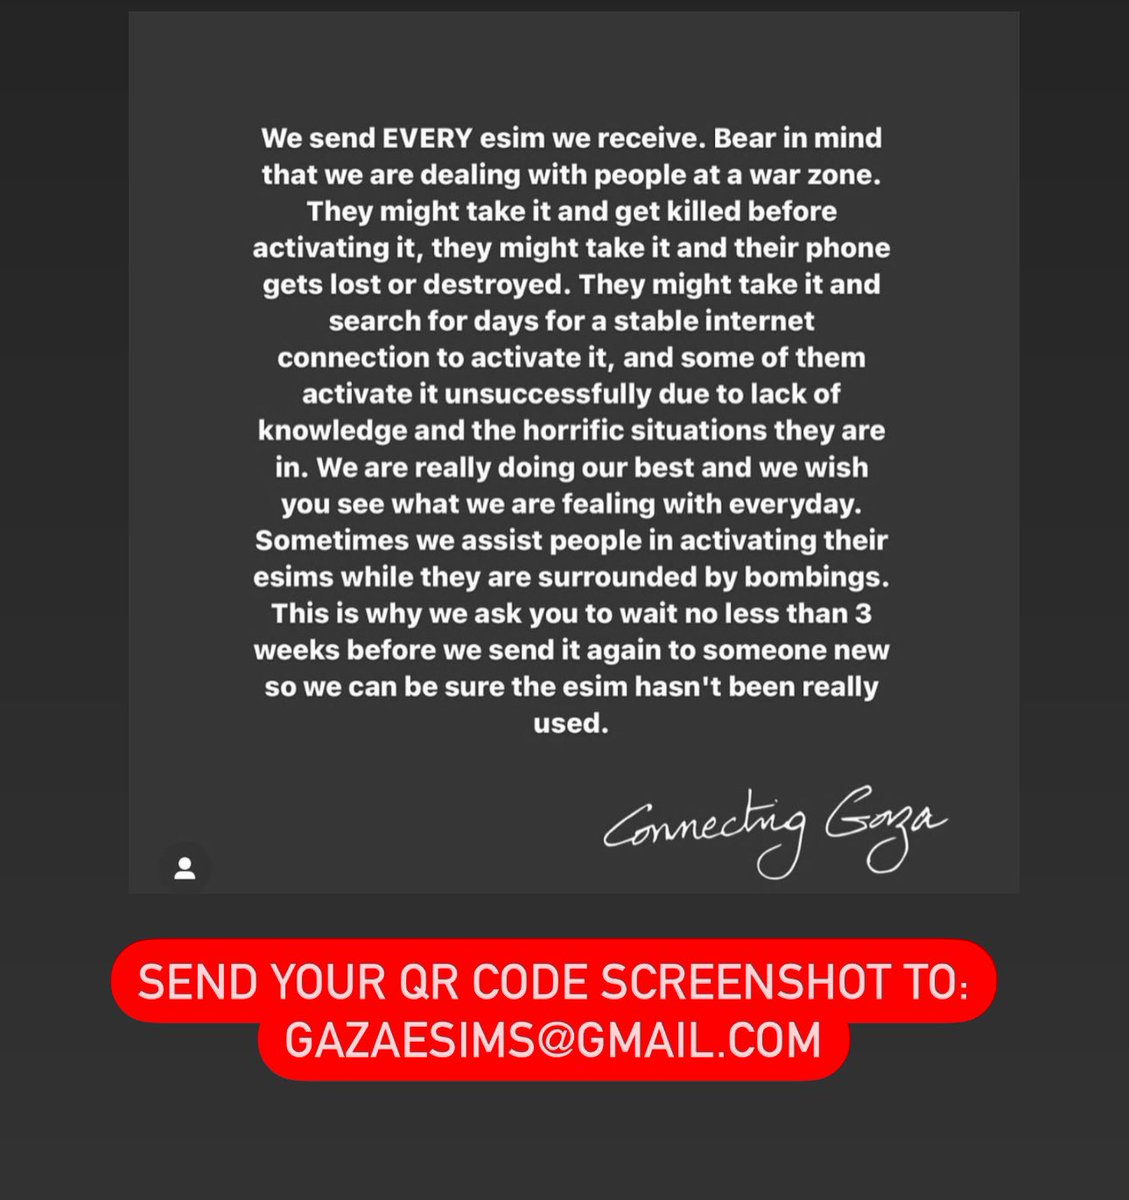 PLEASE DONATE! IT IS URGENT! #connectingGaza